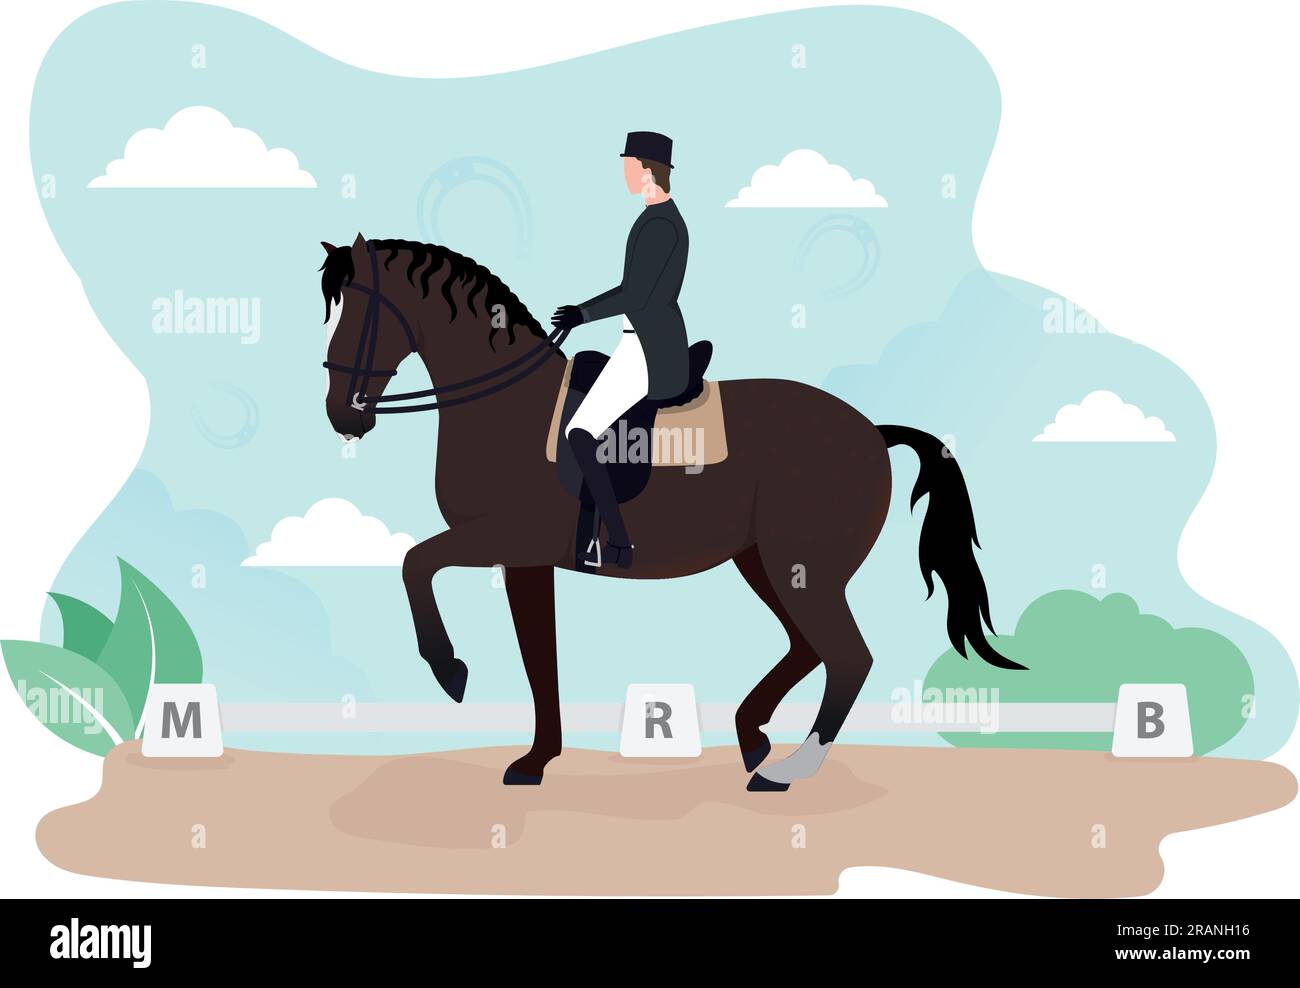 Training piaffe in a dressage arena. Astride a horse. Stock Vector